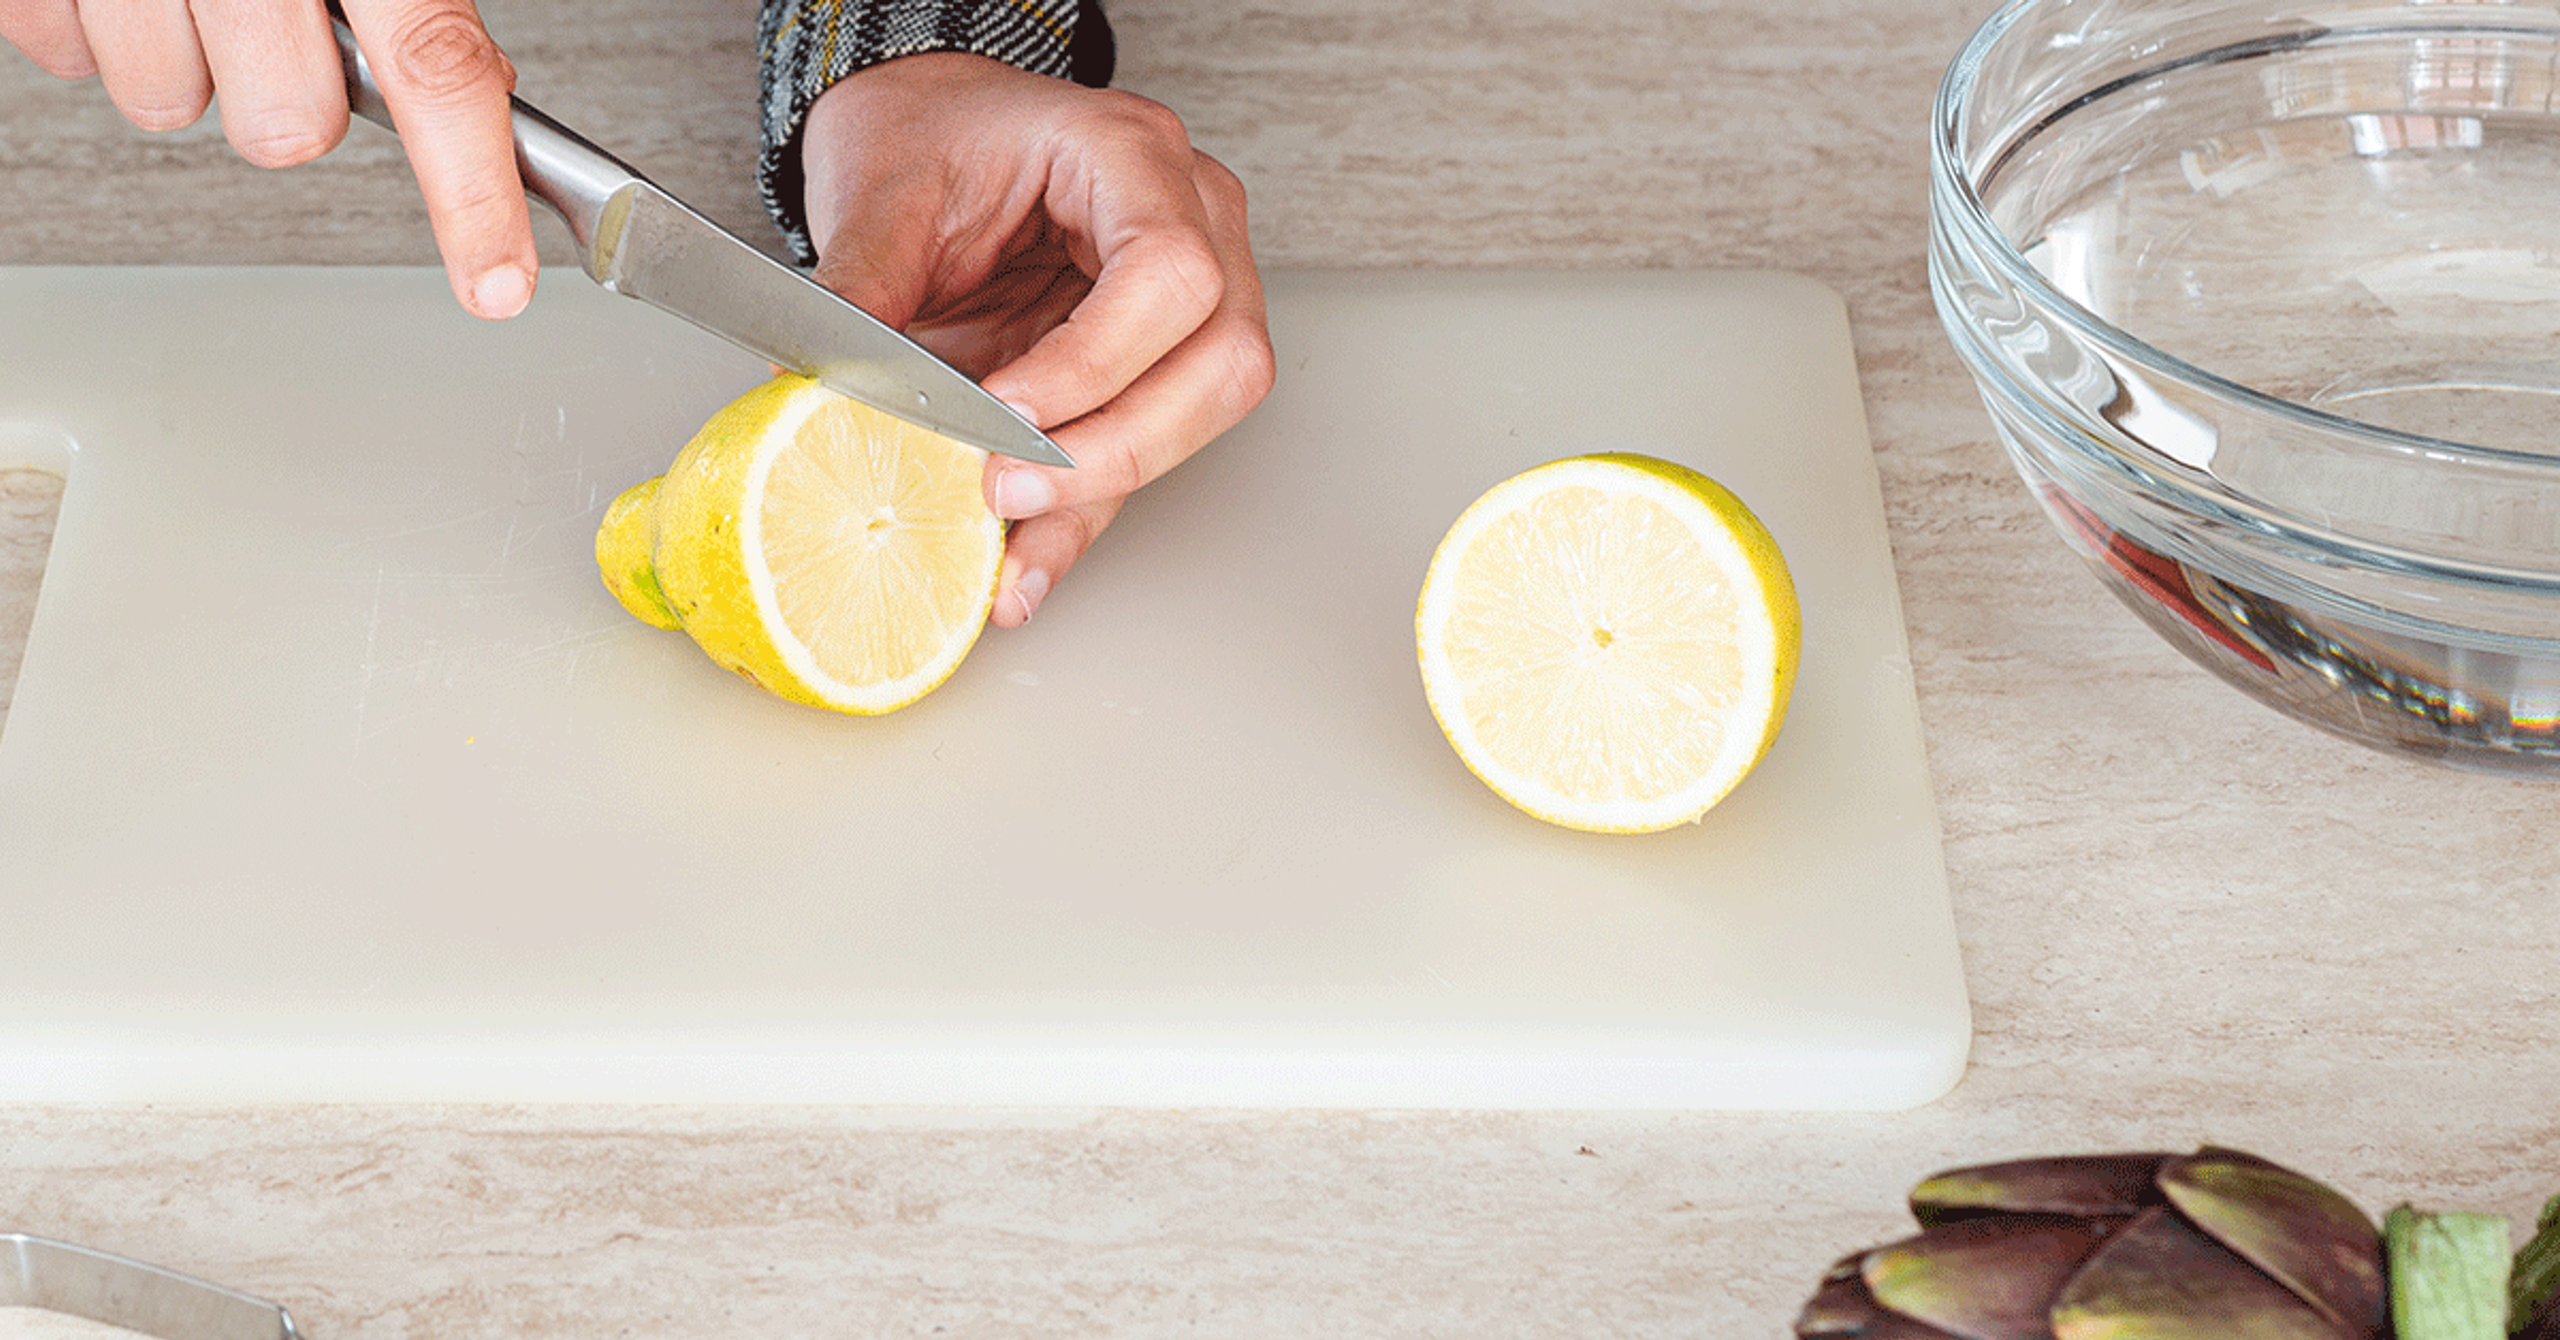 Full article: Plastic cutting boards as a source of microplastics